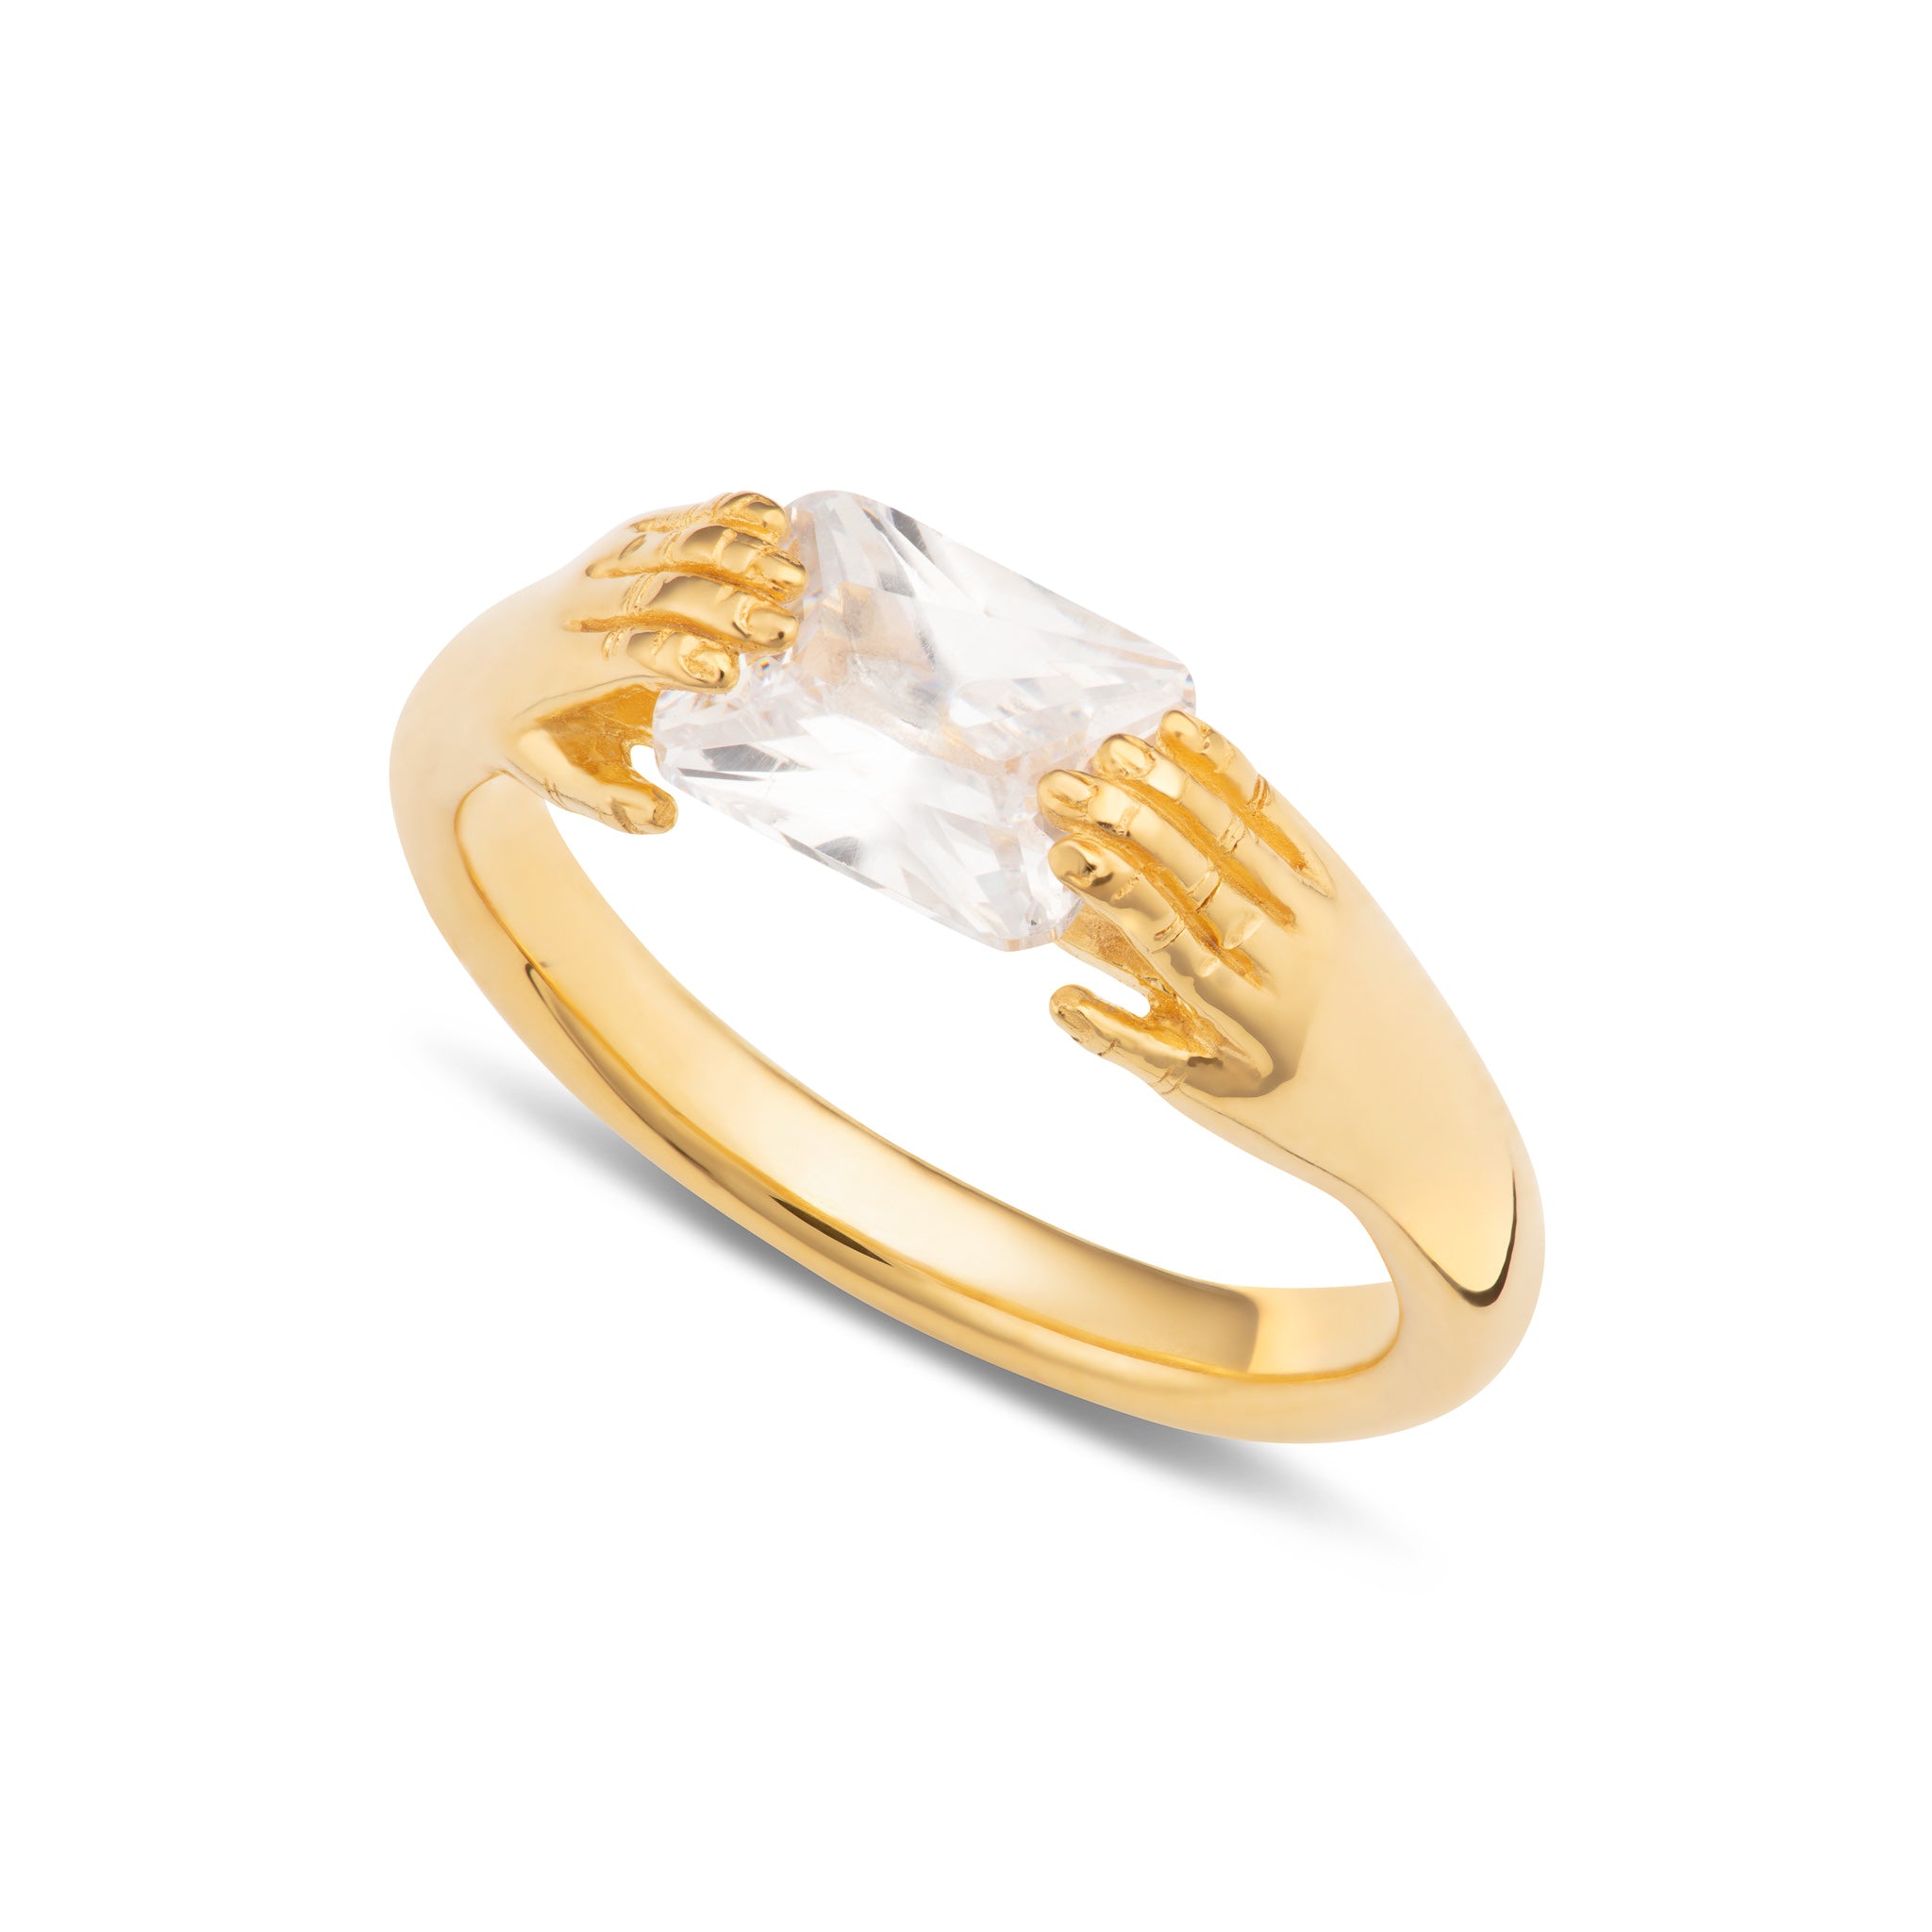  Fede Ring with Clear Stone - by Scream Pretty